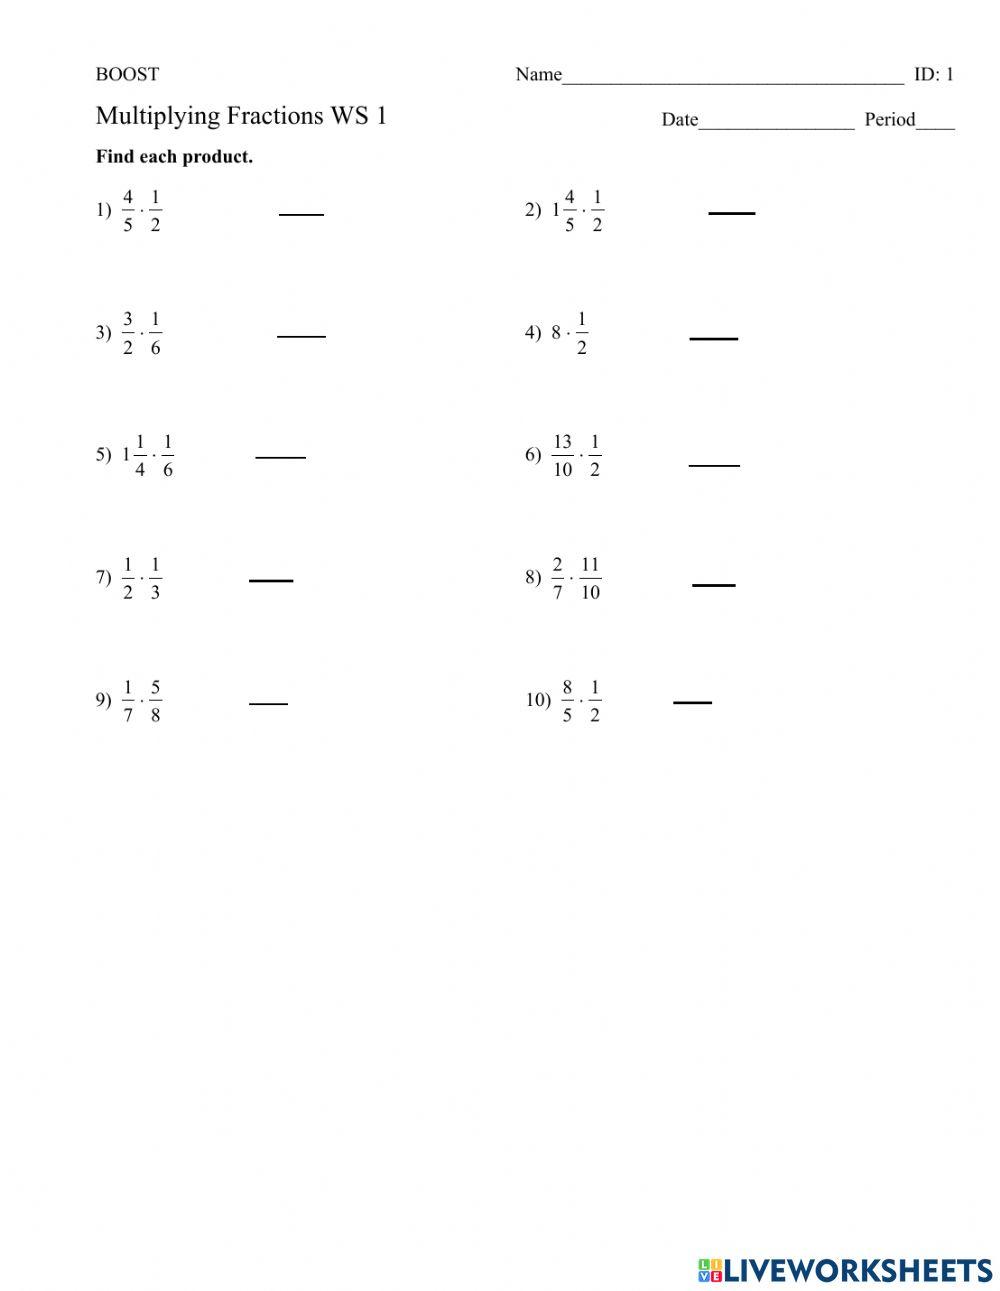 BOOST Multiplying Fractions WS 1